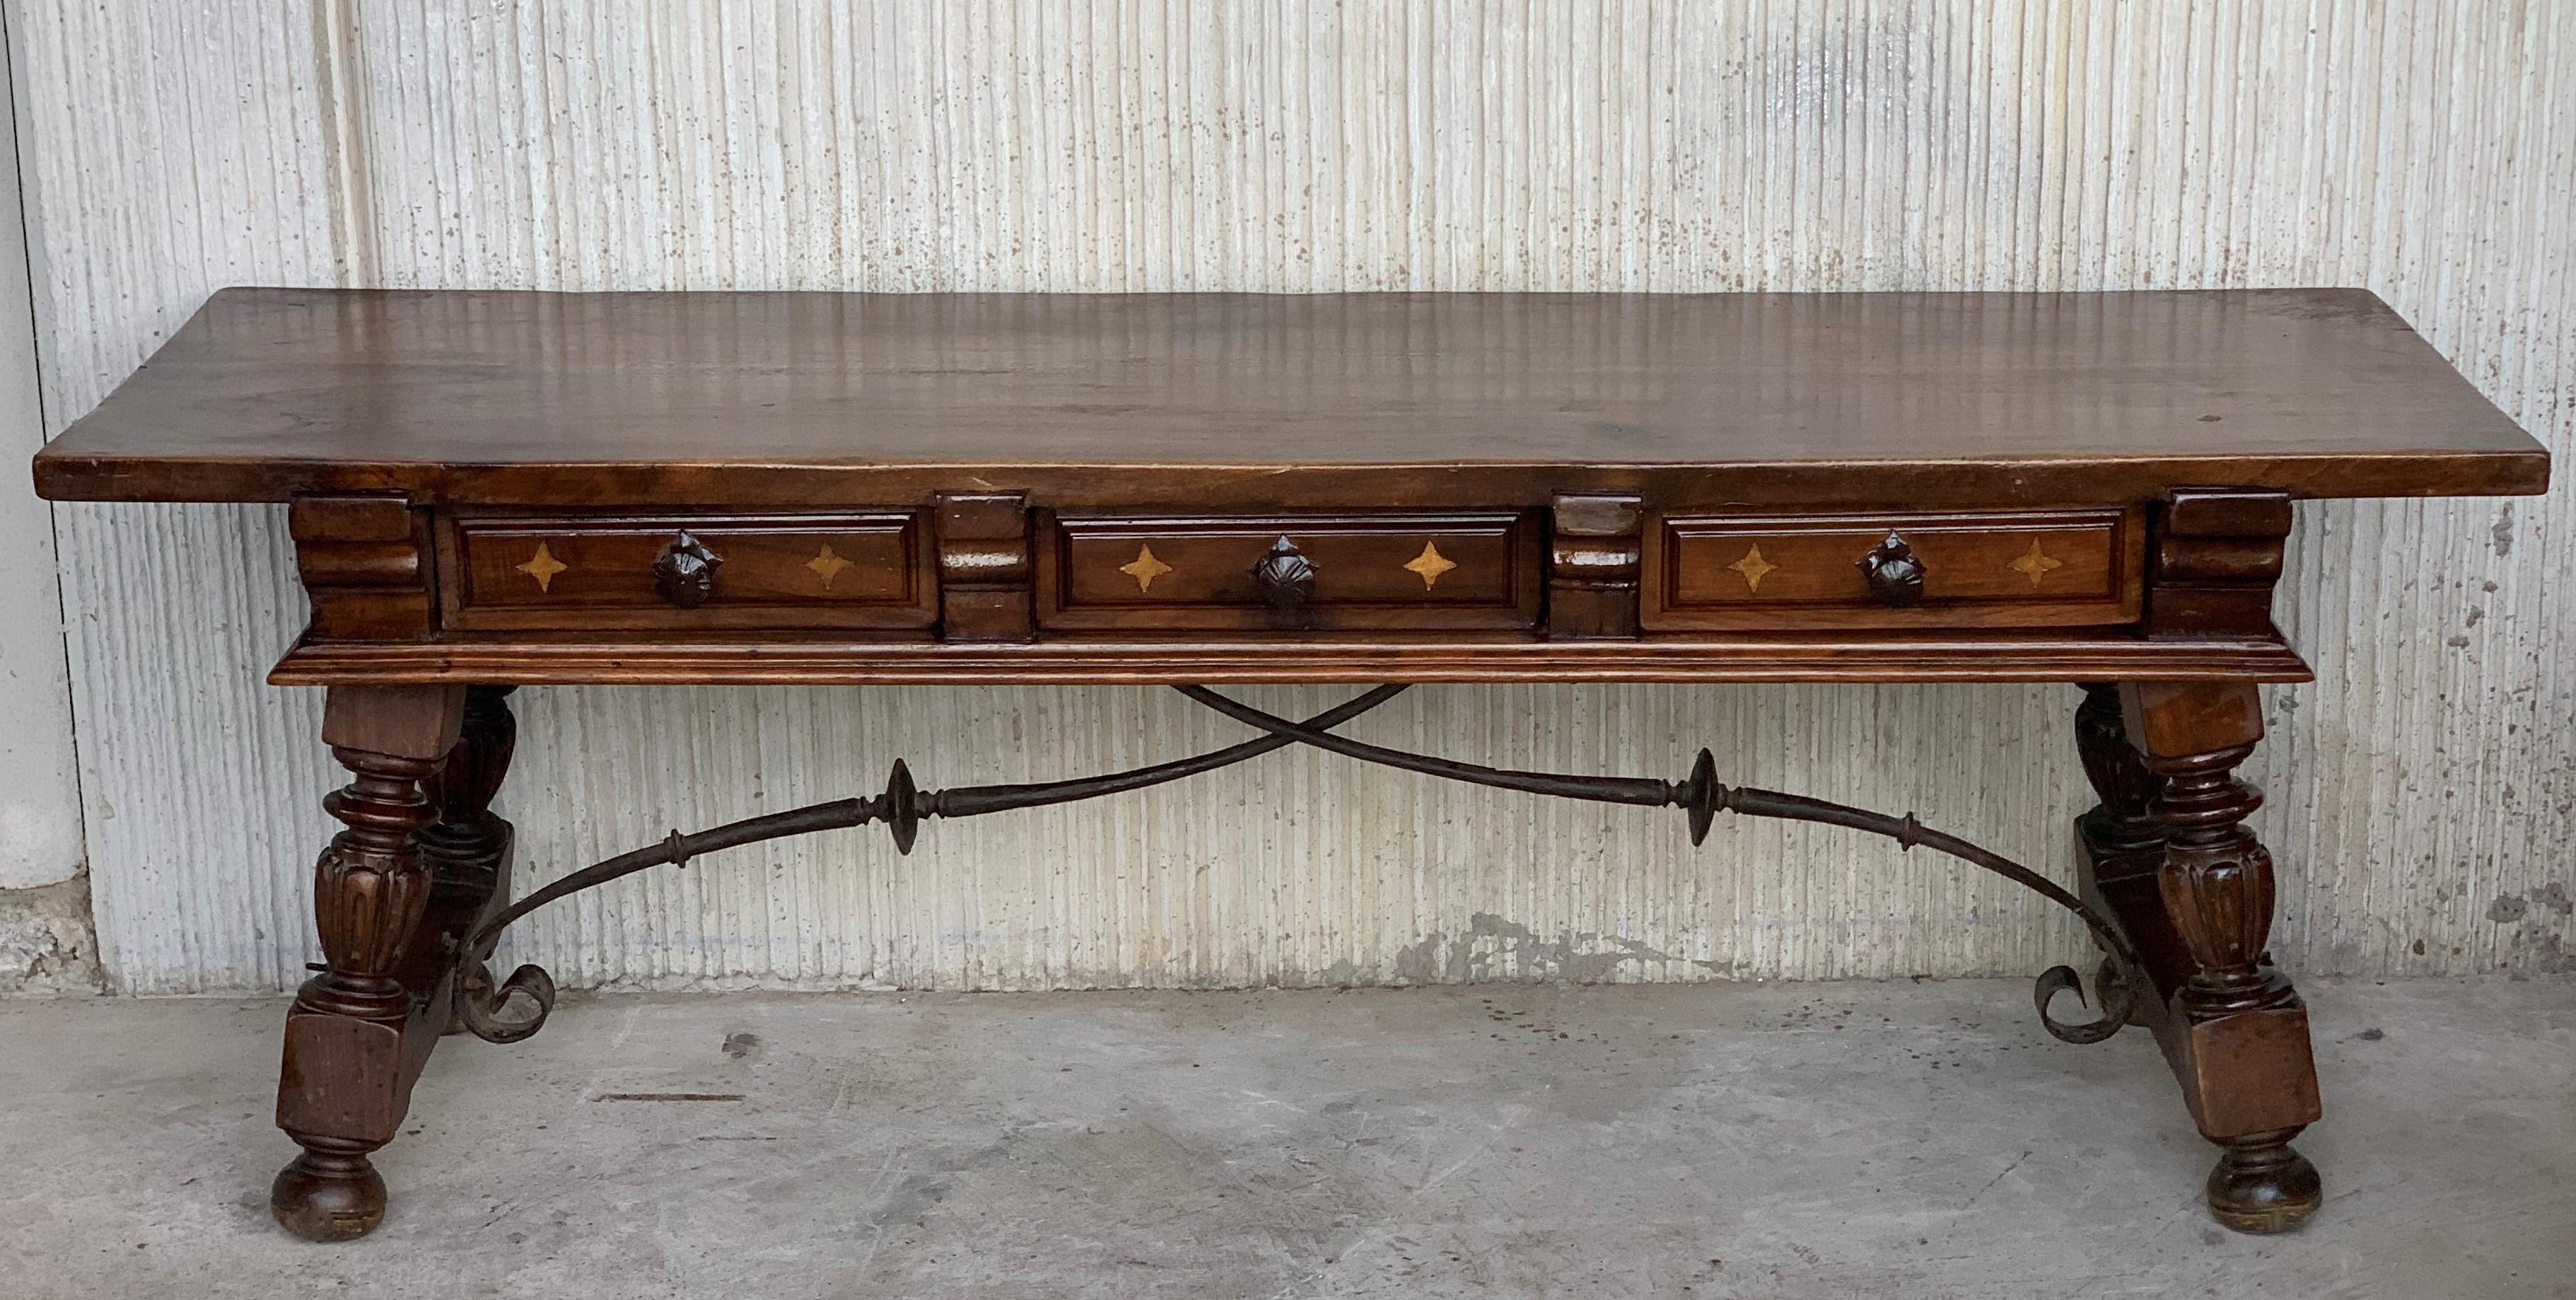 18th Spanish bench or low console table with marquetry drawers
Original iron pull hardware and iron stretcher
That back has the same picture than the front (without drawers).